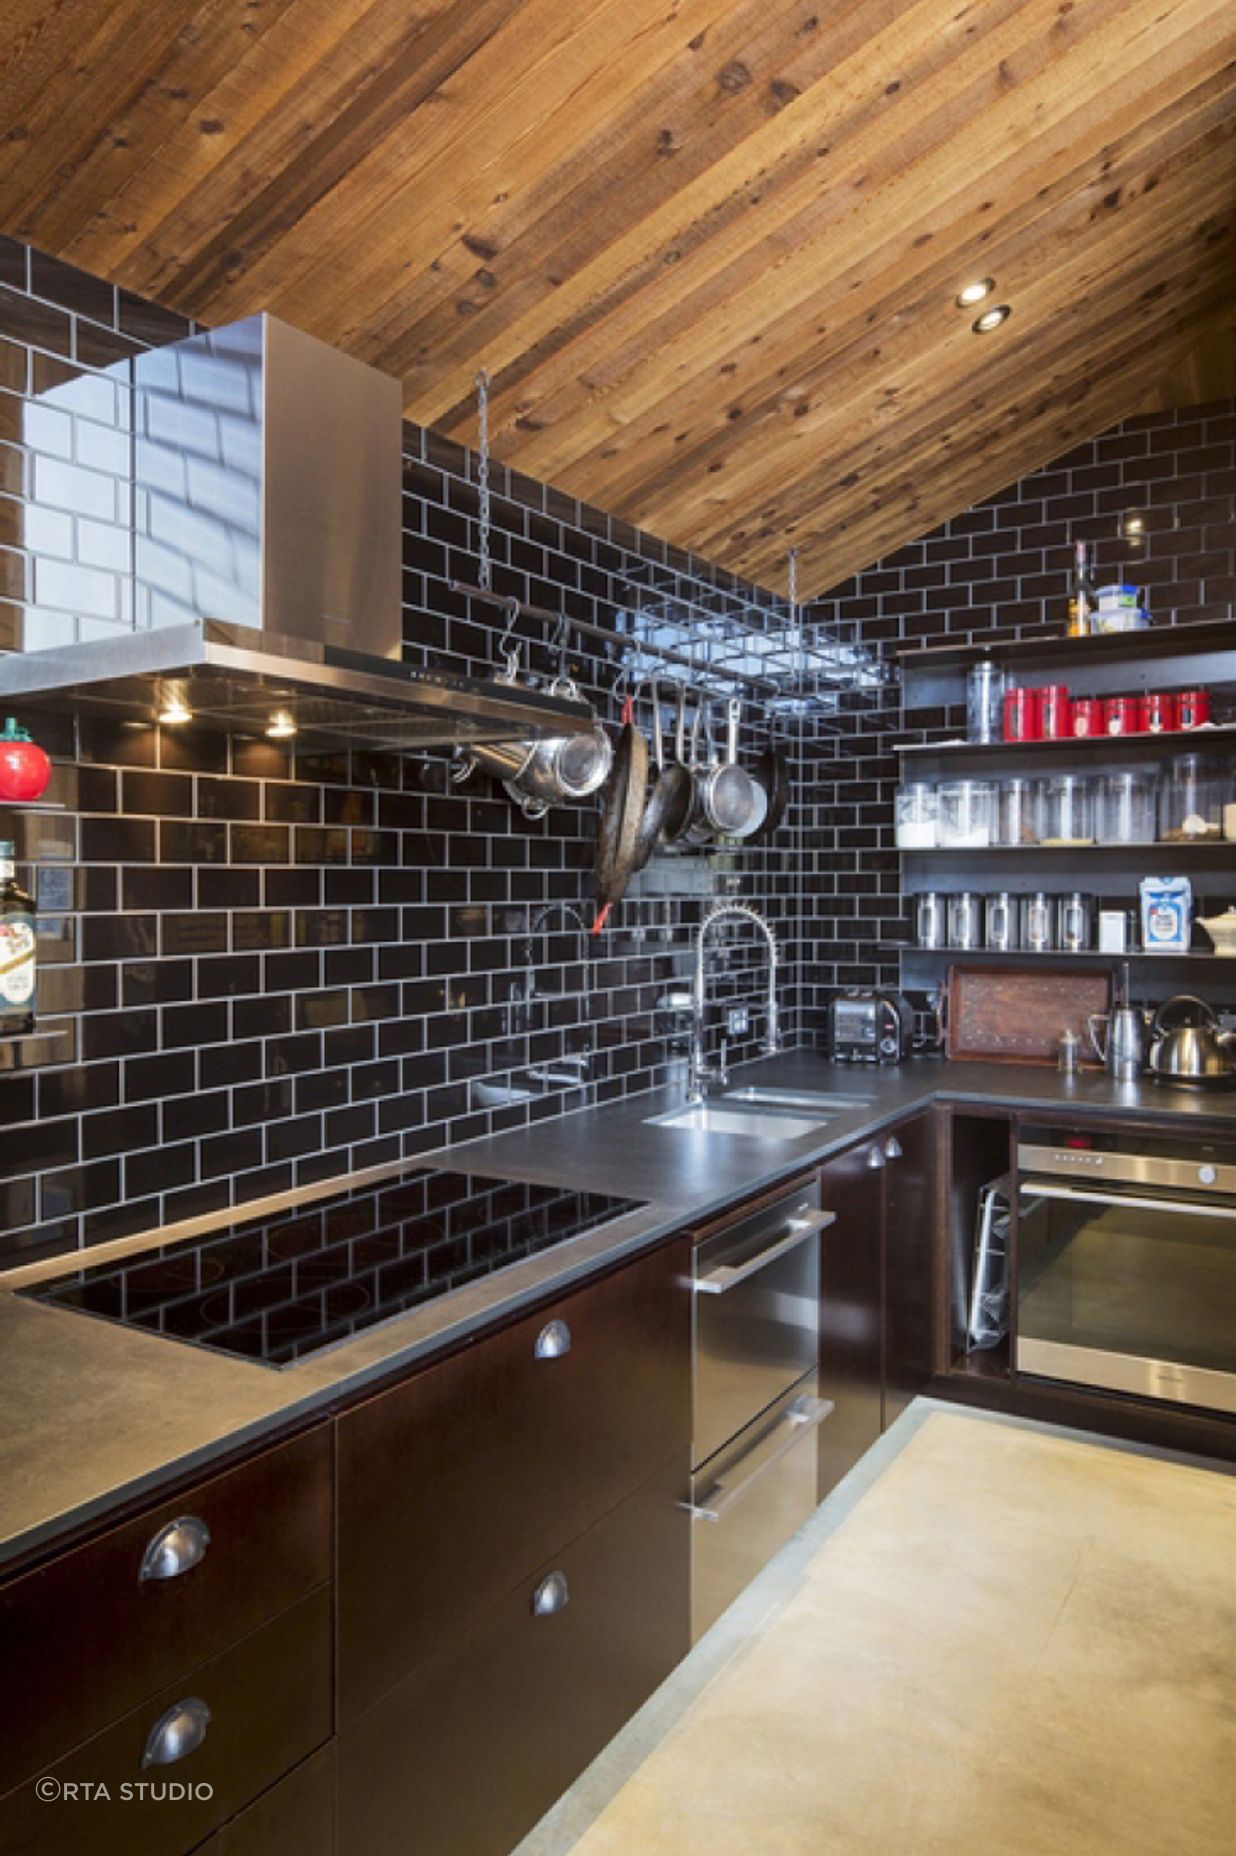 Glossy black subway tiles clad the walls of the kitchen.